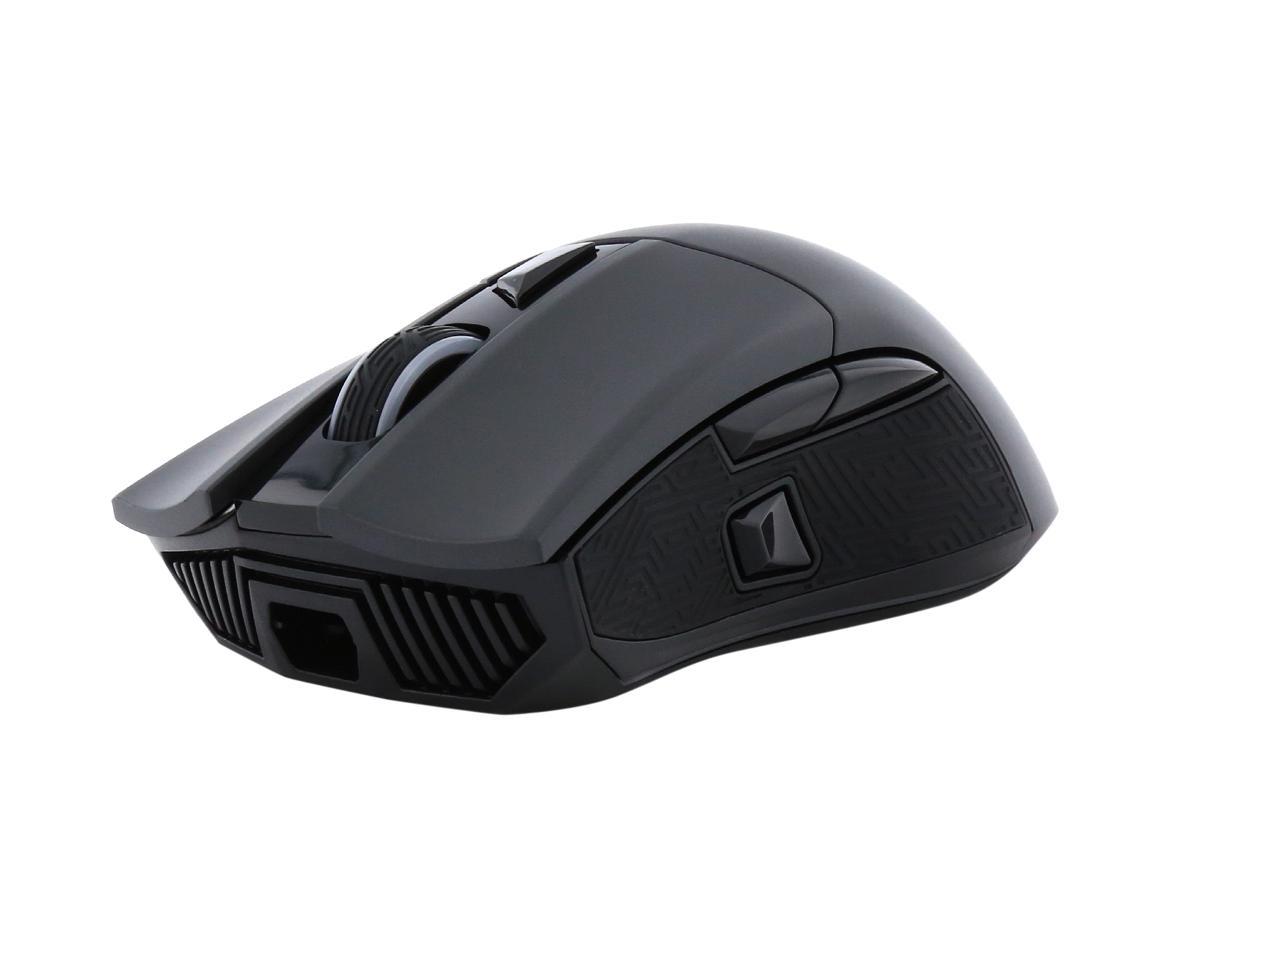 Asus Rog Gladius Ii Aura Sync Usb Wired Optical Ergonomic Gaming Mouse With Dpi Target Button Newegg Com